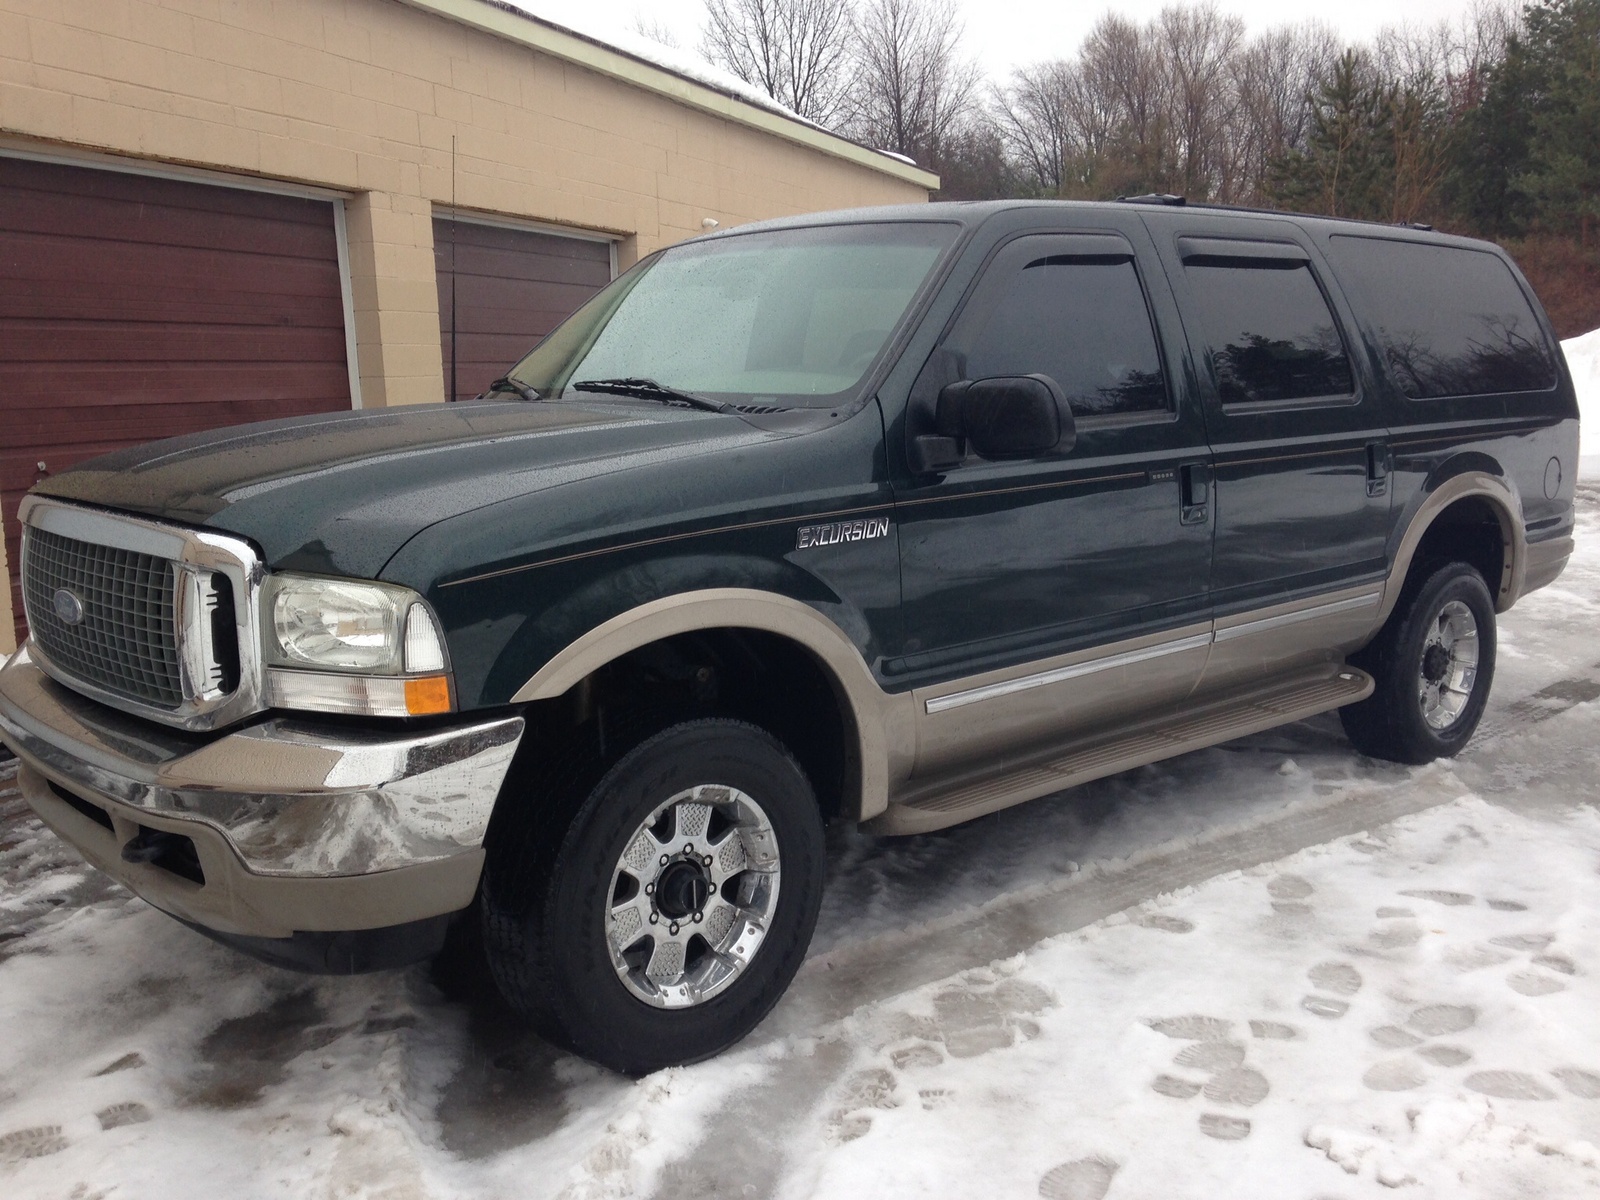 2004 Ford excursion limited reviews #6